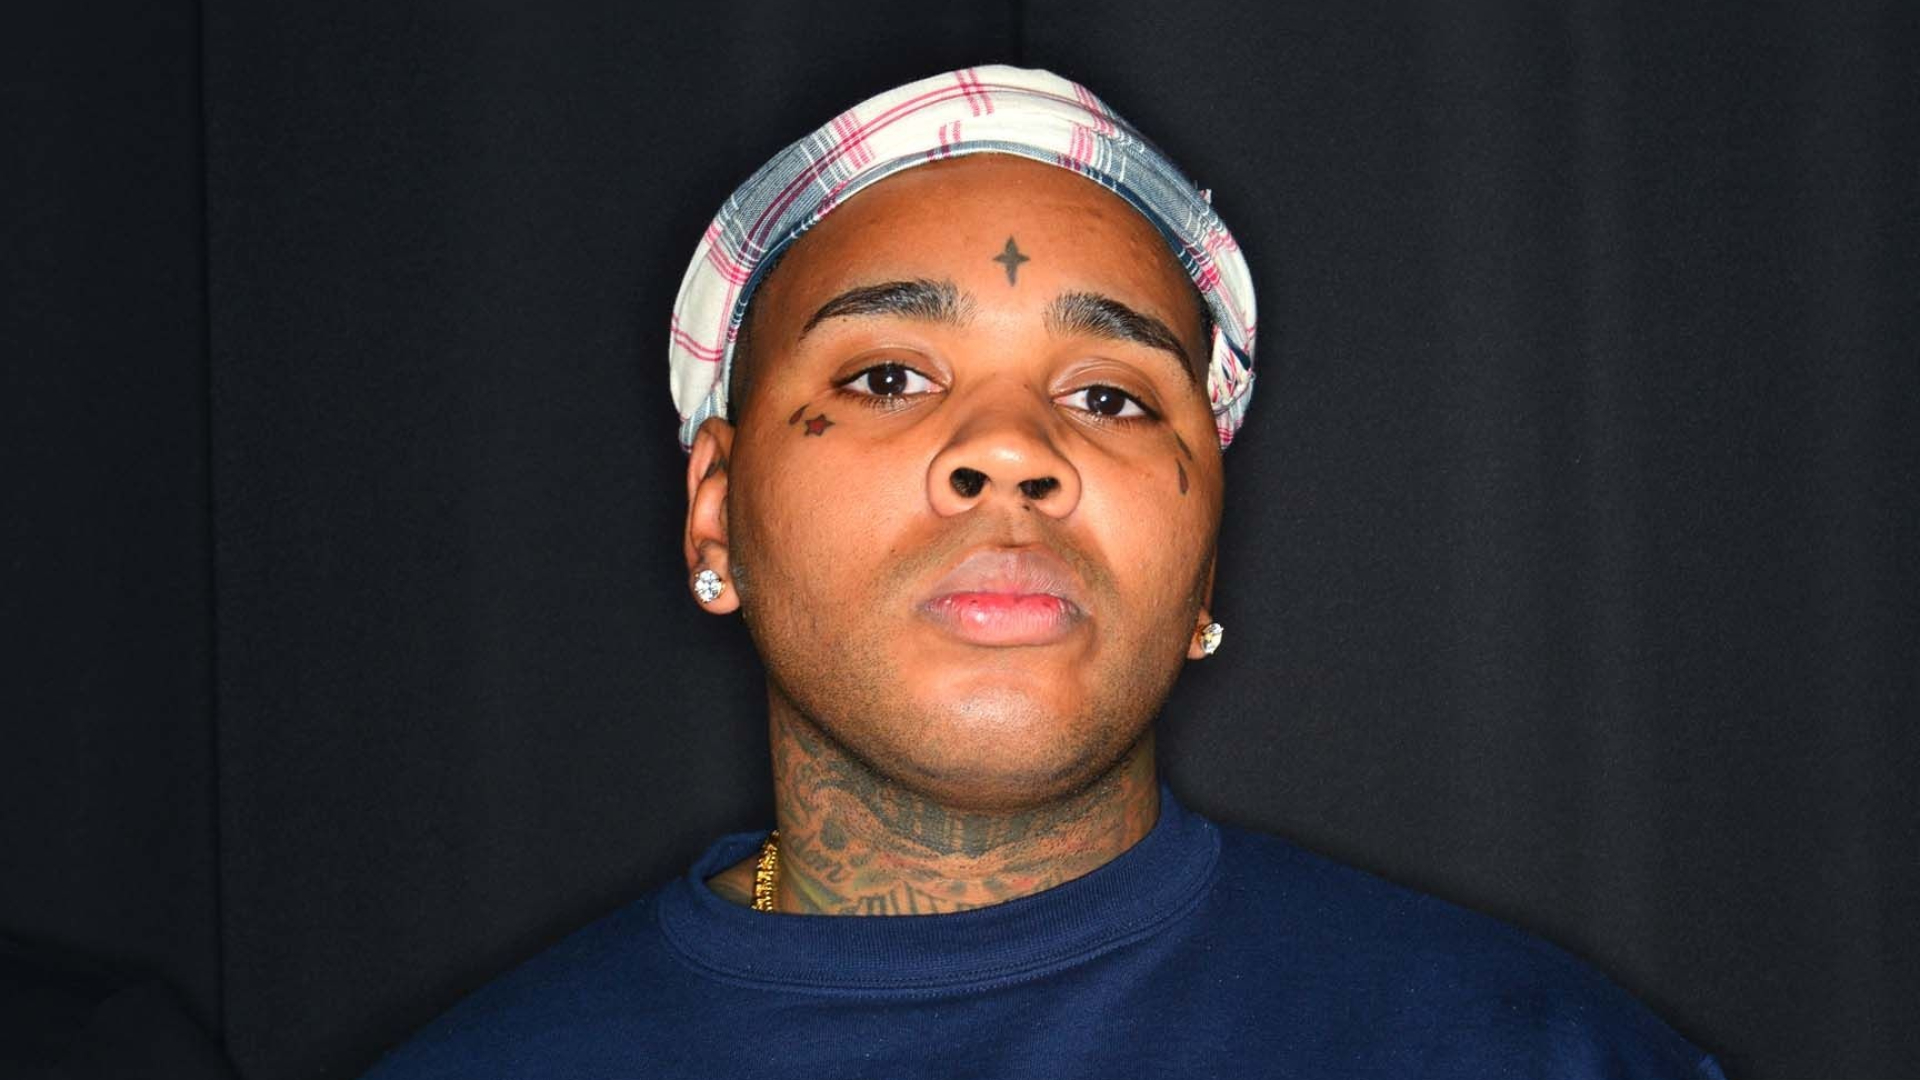 Kevin Gates, Dope wallpapers, Music-inspired visuals, Creative expression, 1920x1080 Full HD Desktop